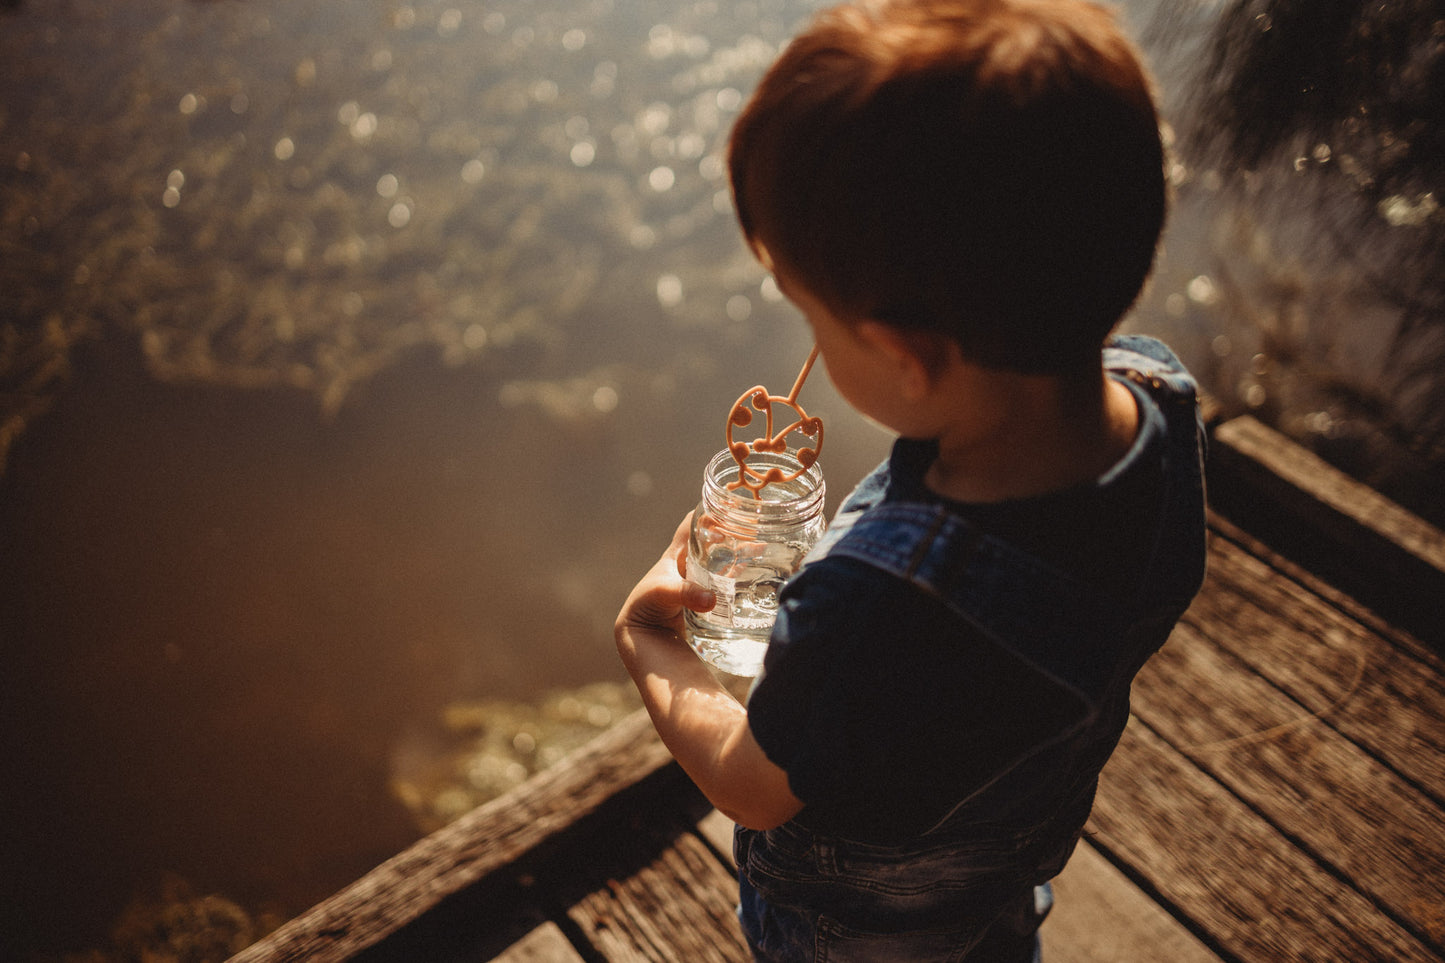 A boy in denim dungarees is dipping the ladybird shaped eco bubble wand from Kinfolk Pantry into a jar of magic potion ready to blow bubbles! The boy is standing on a boardwalk in an outdoor forest setting with a lake.